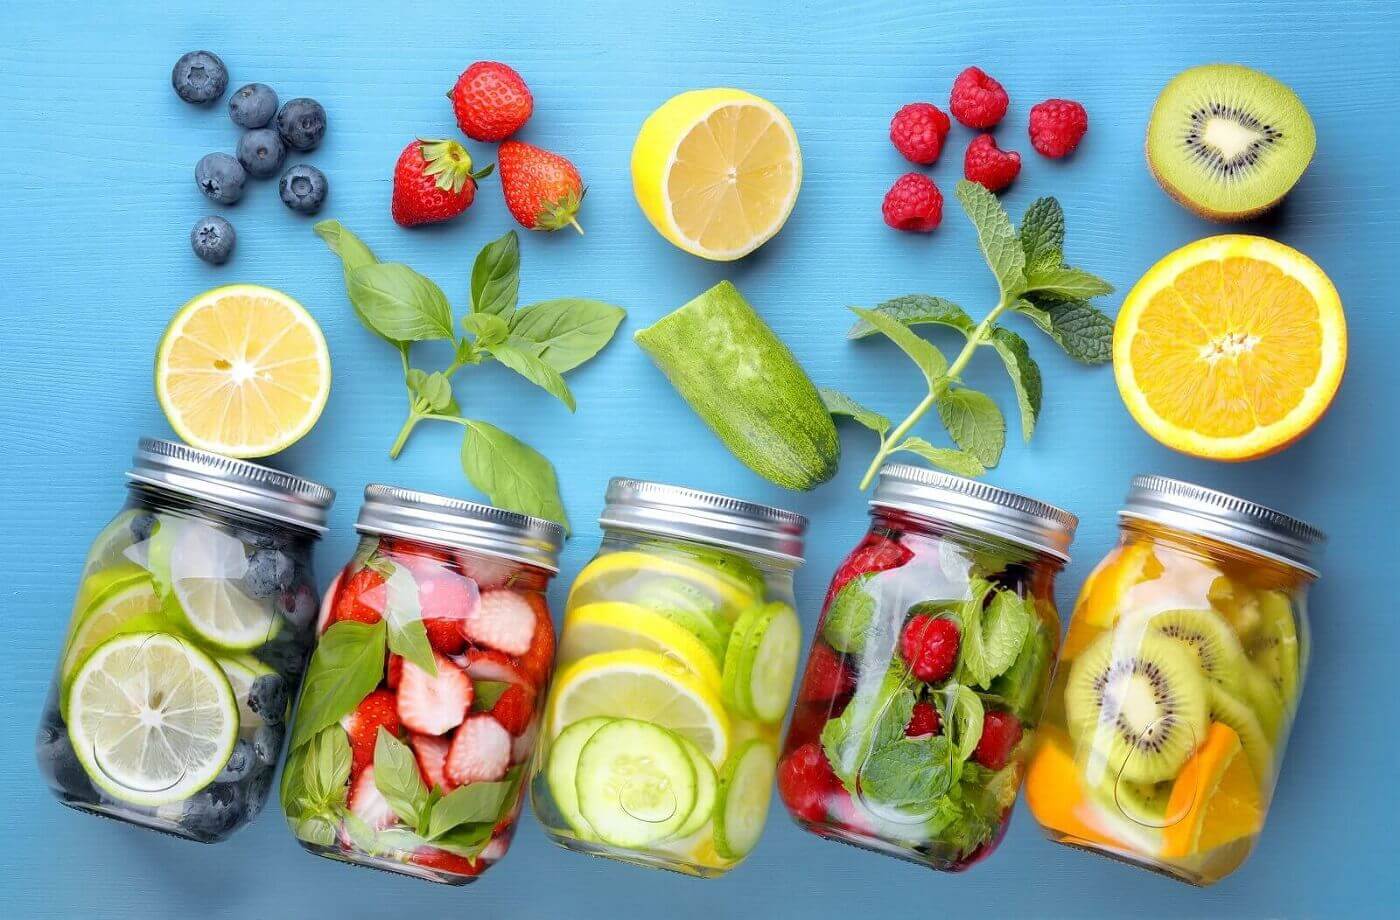 14 Detox Water Recipes to Boost Your Metabolism